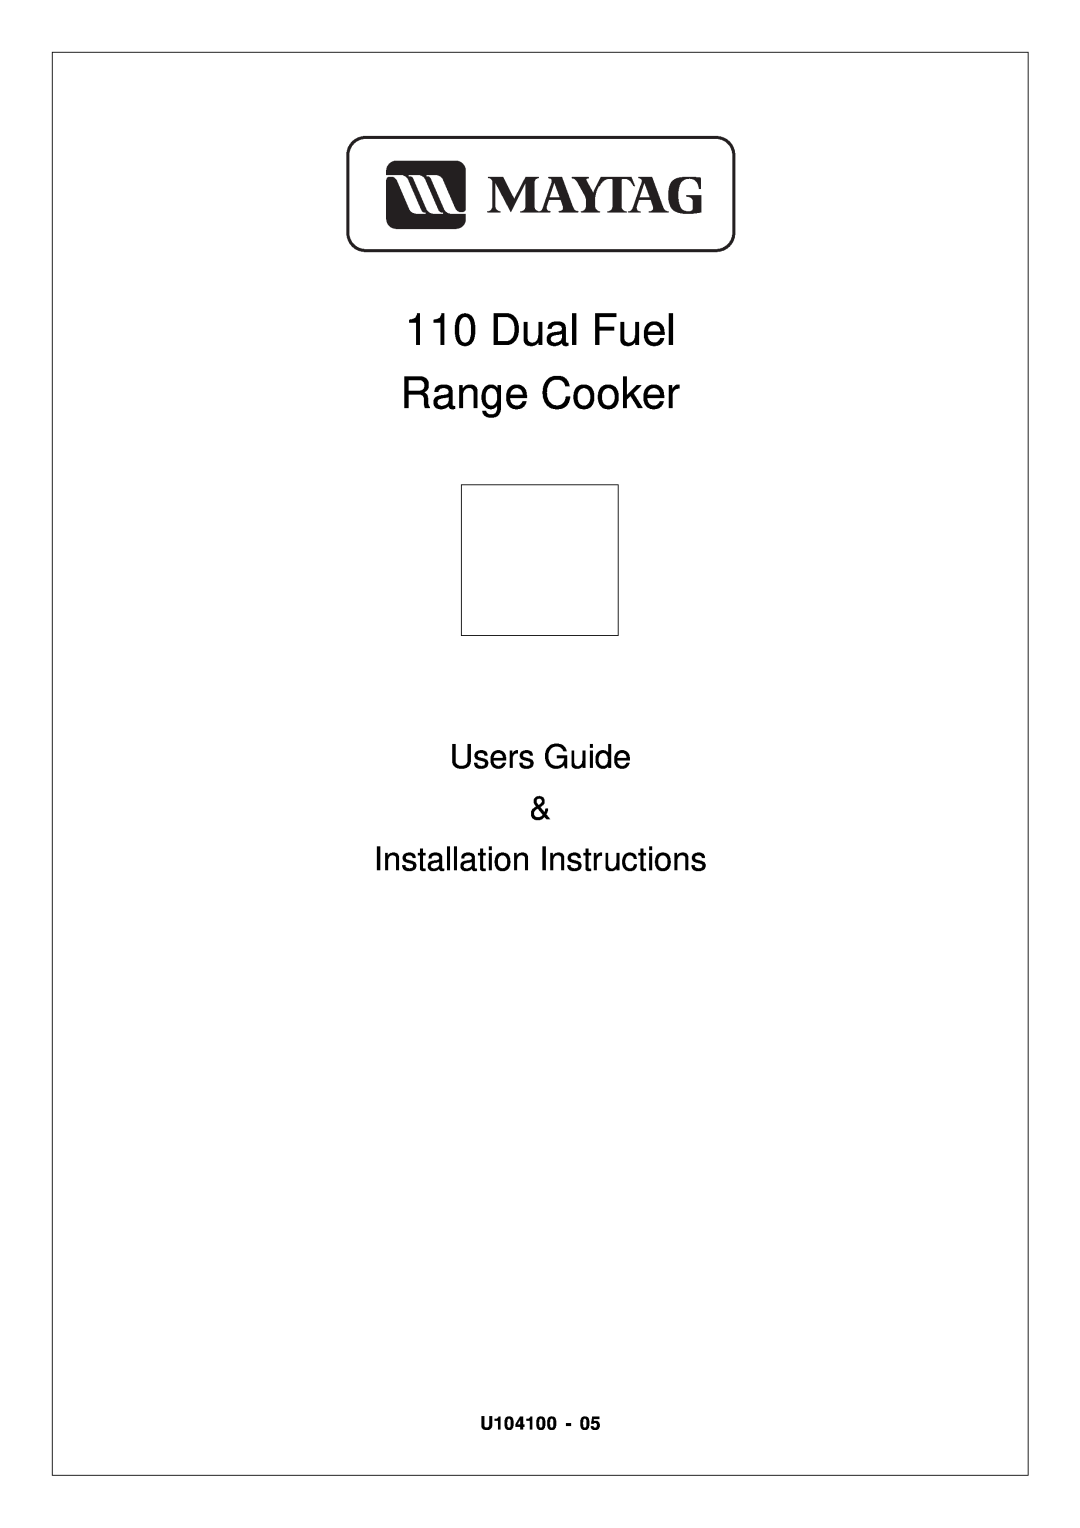 Maytag 110 installation instructions Users Guide, Installation Instructions, Dual Fuel Range Cooker, U104100 